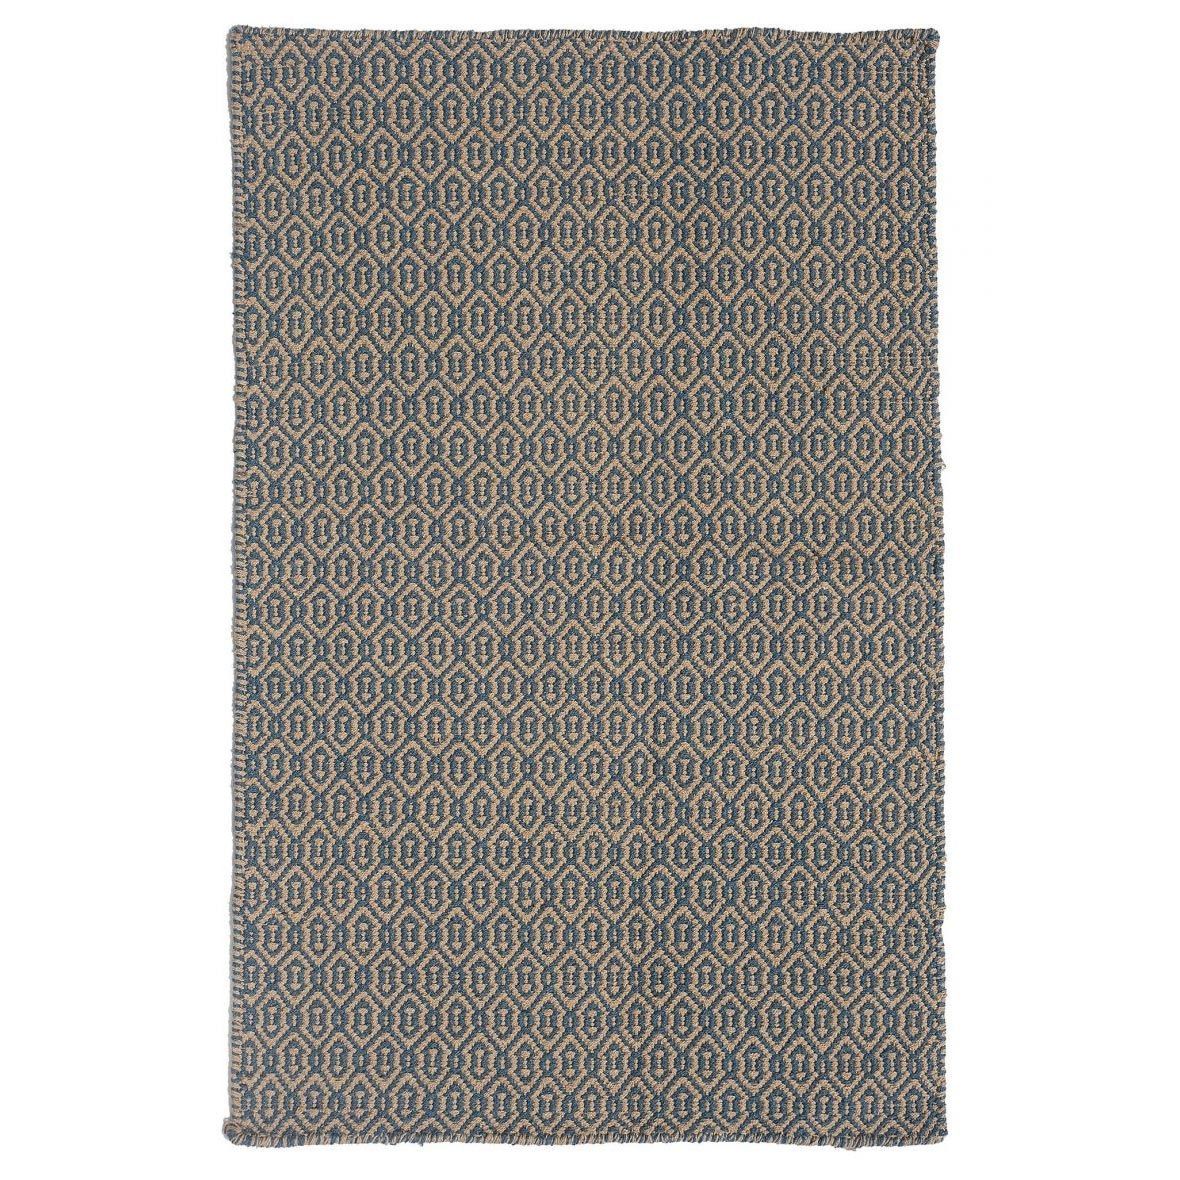 18 Best Washable Rugs To In 2021, 15 Foot Runner Rug Washable